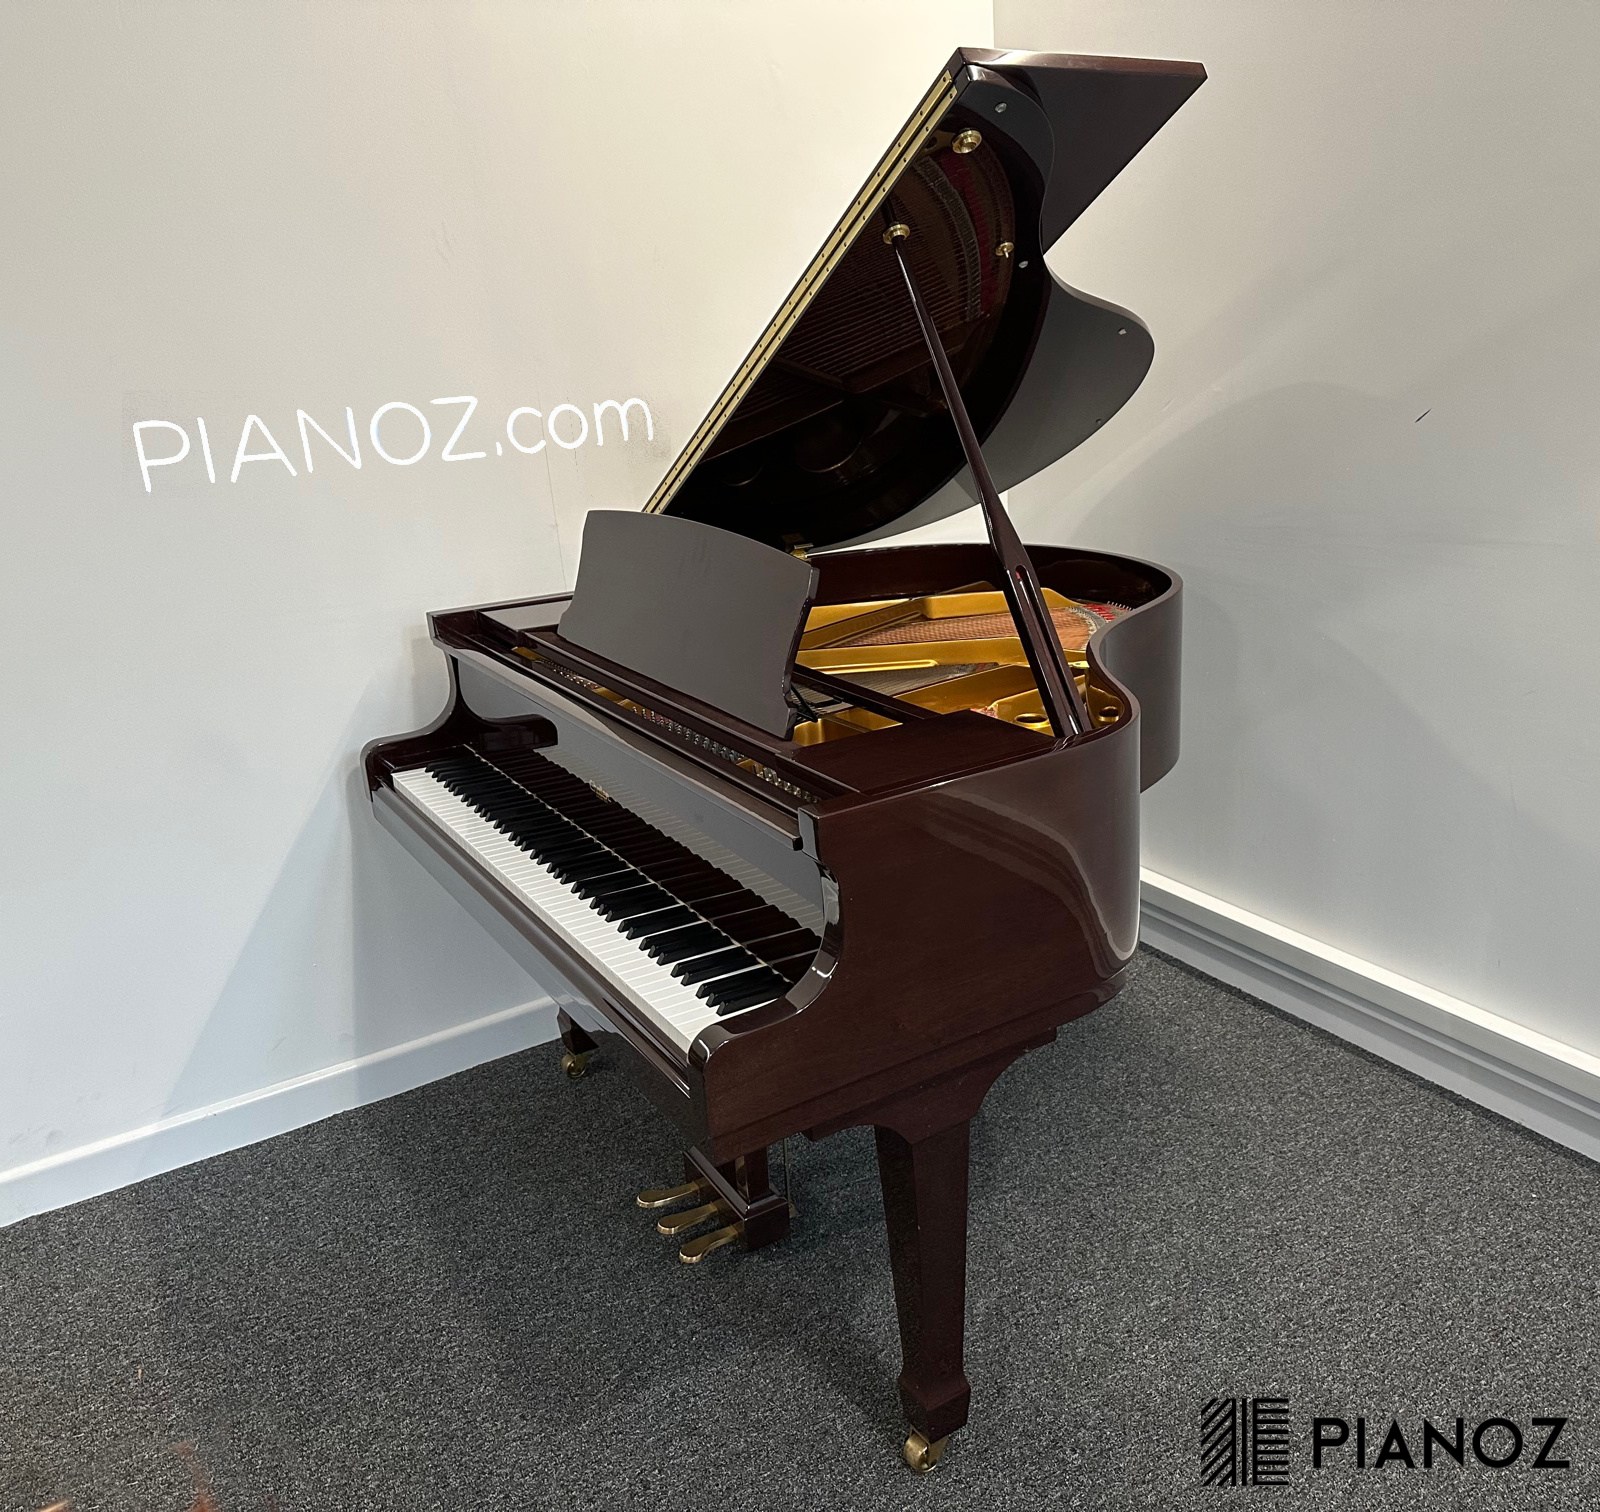 Challen 142 Baby Grand Piano piano for sale in UK